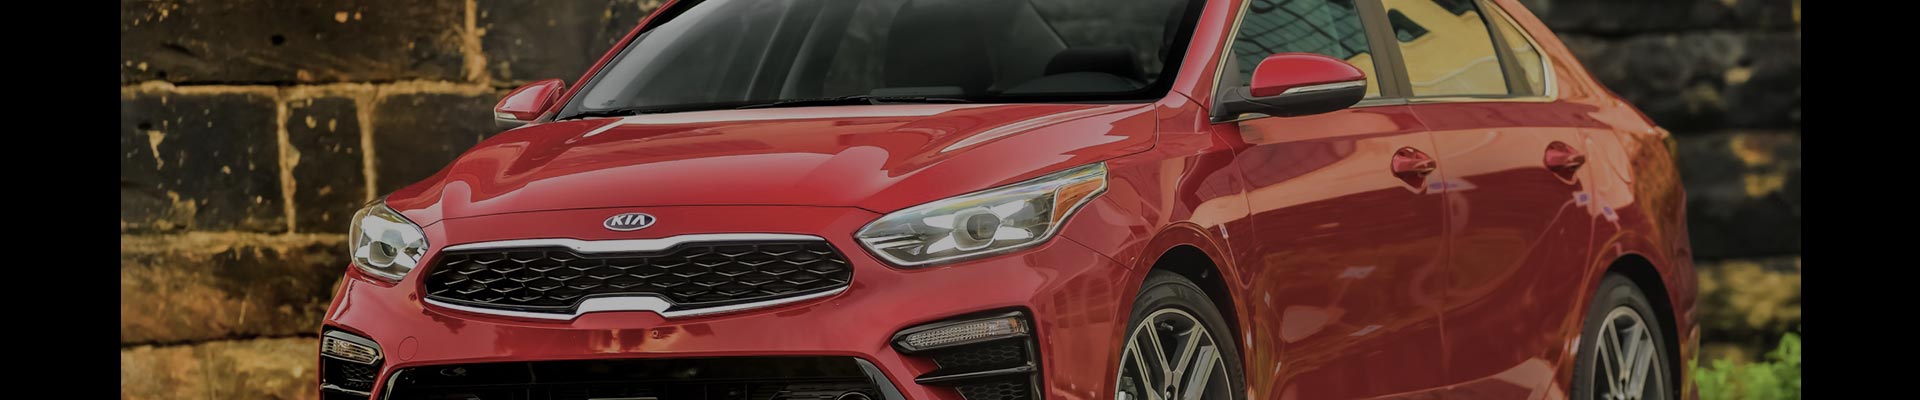 Shop Replacement and OEM 2016 Kia Forte Parts with Discounted Price on the Net